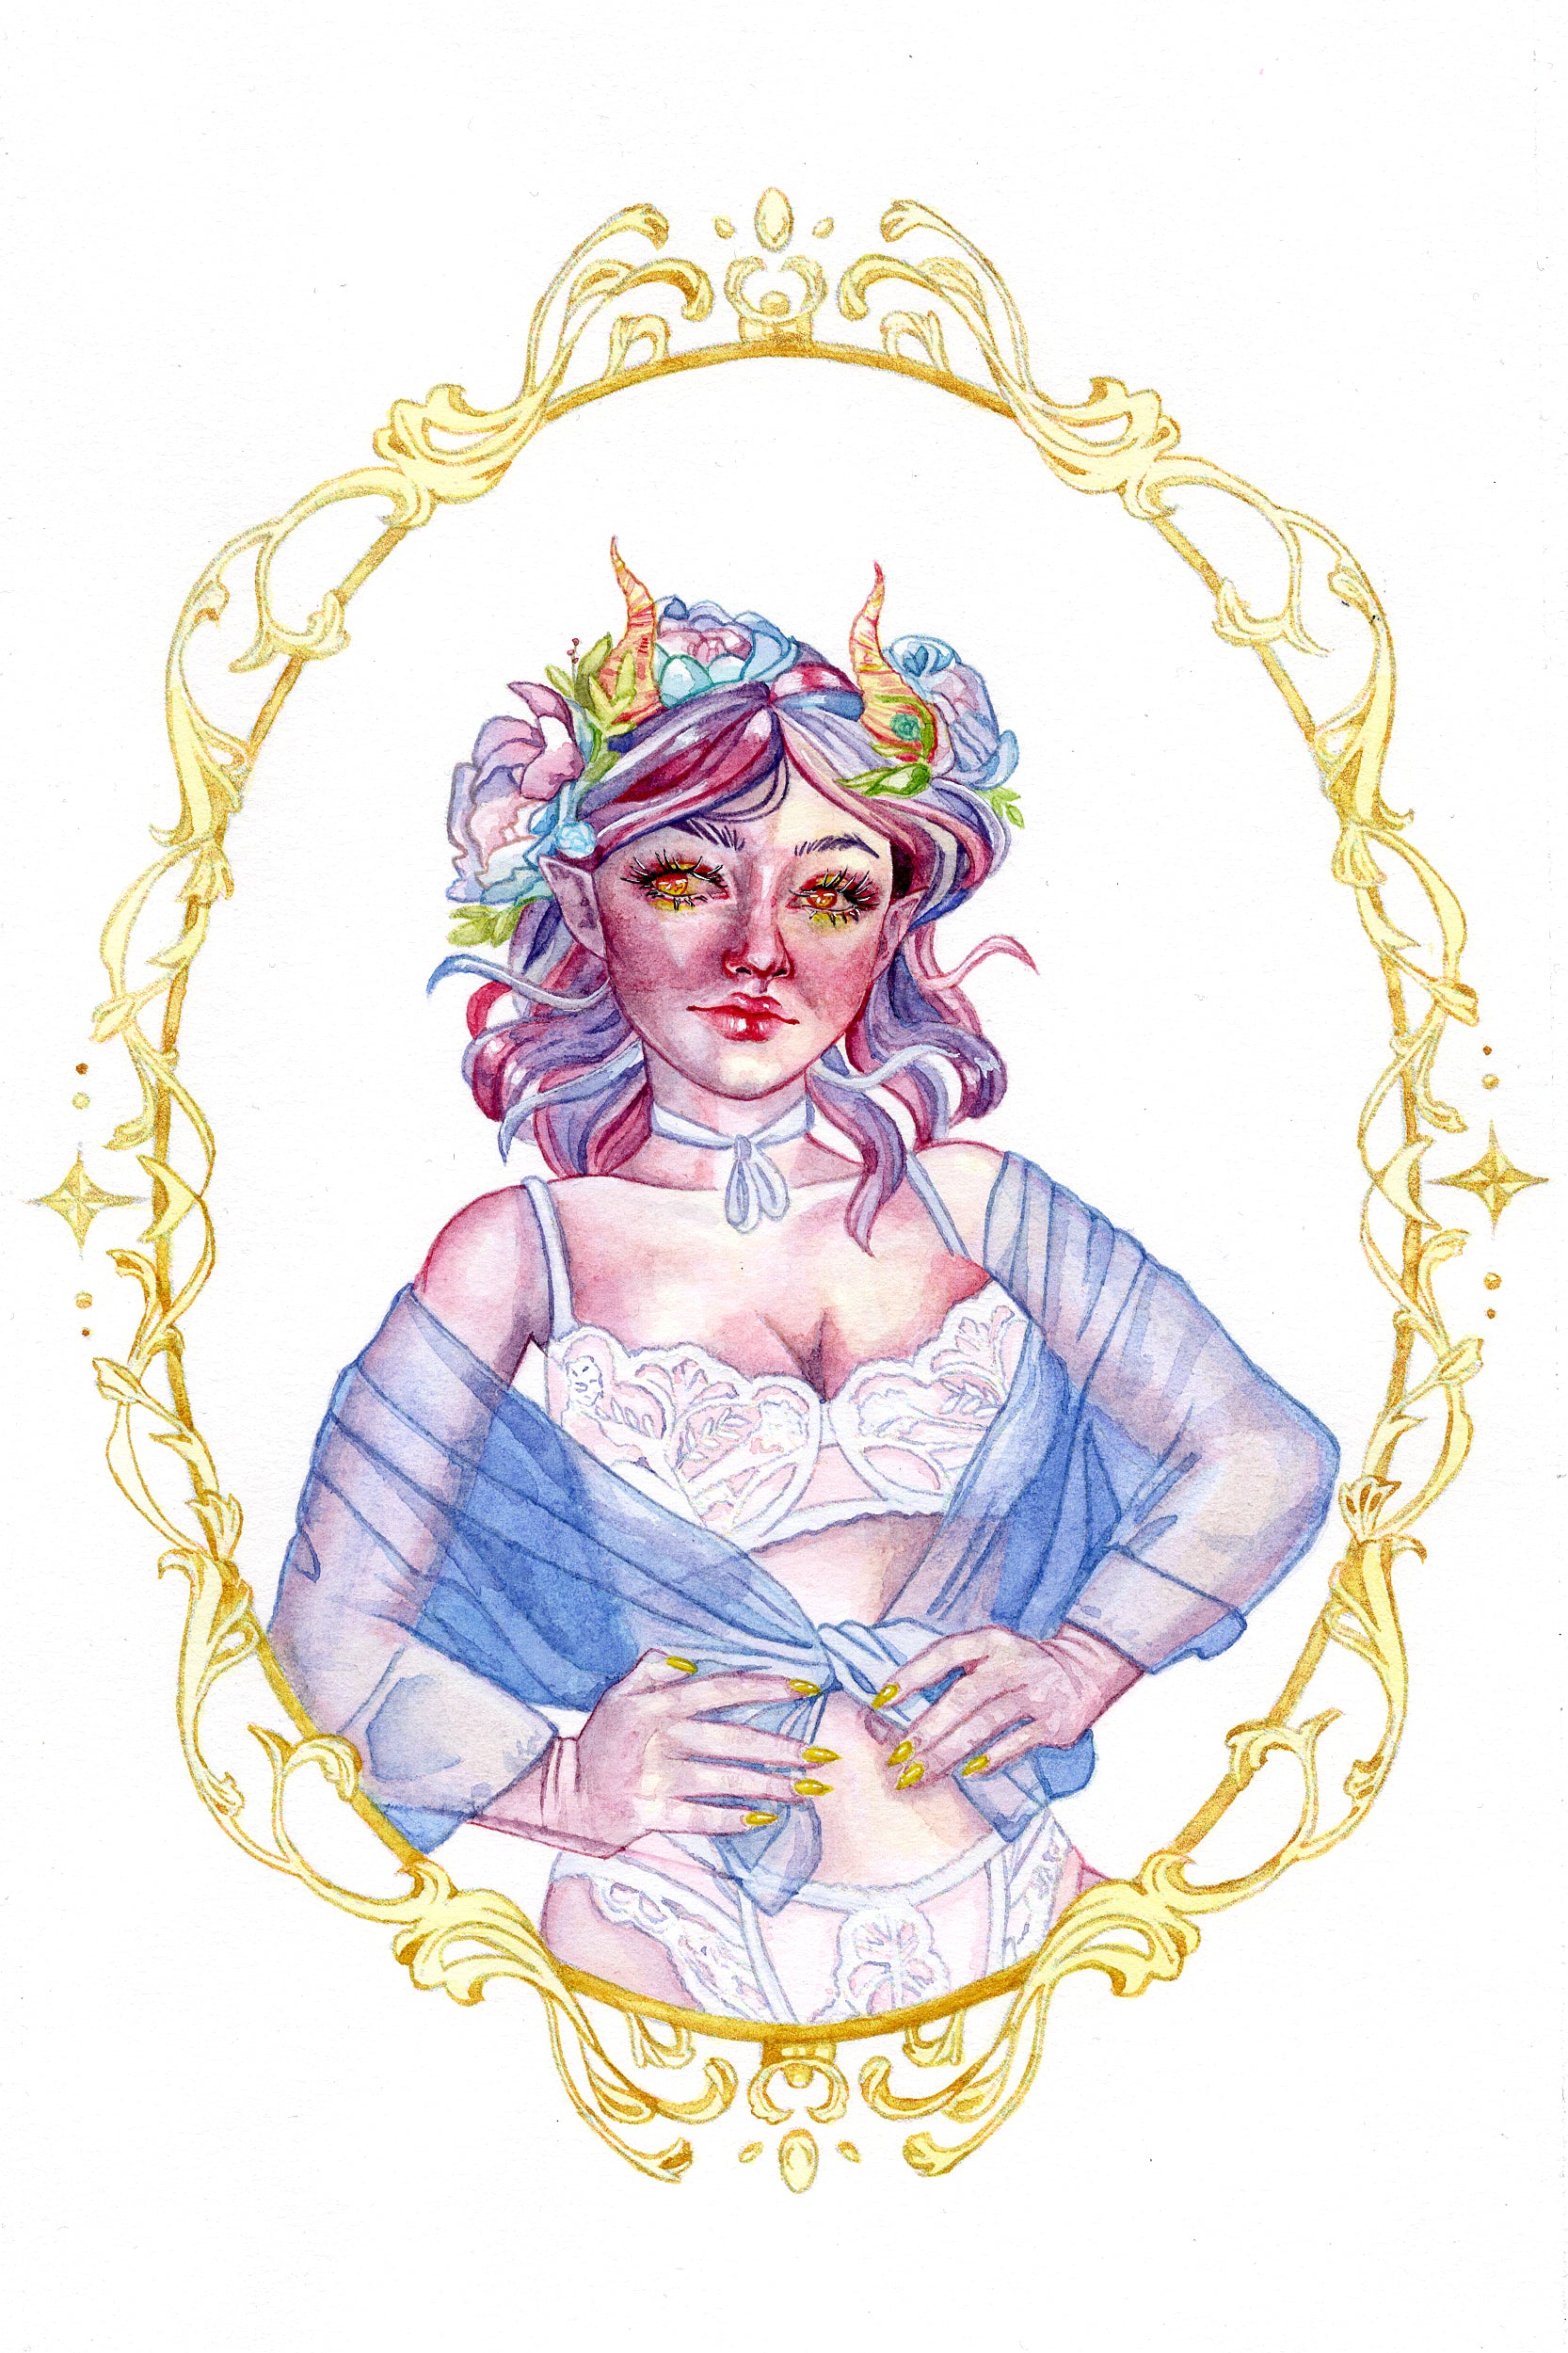 Watercolor painting of a demon girl in lingerie. She has horns a little elf ears with flowers in her hair.